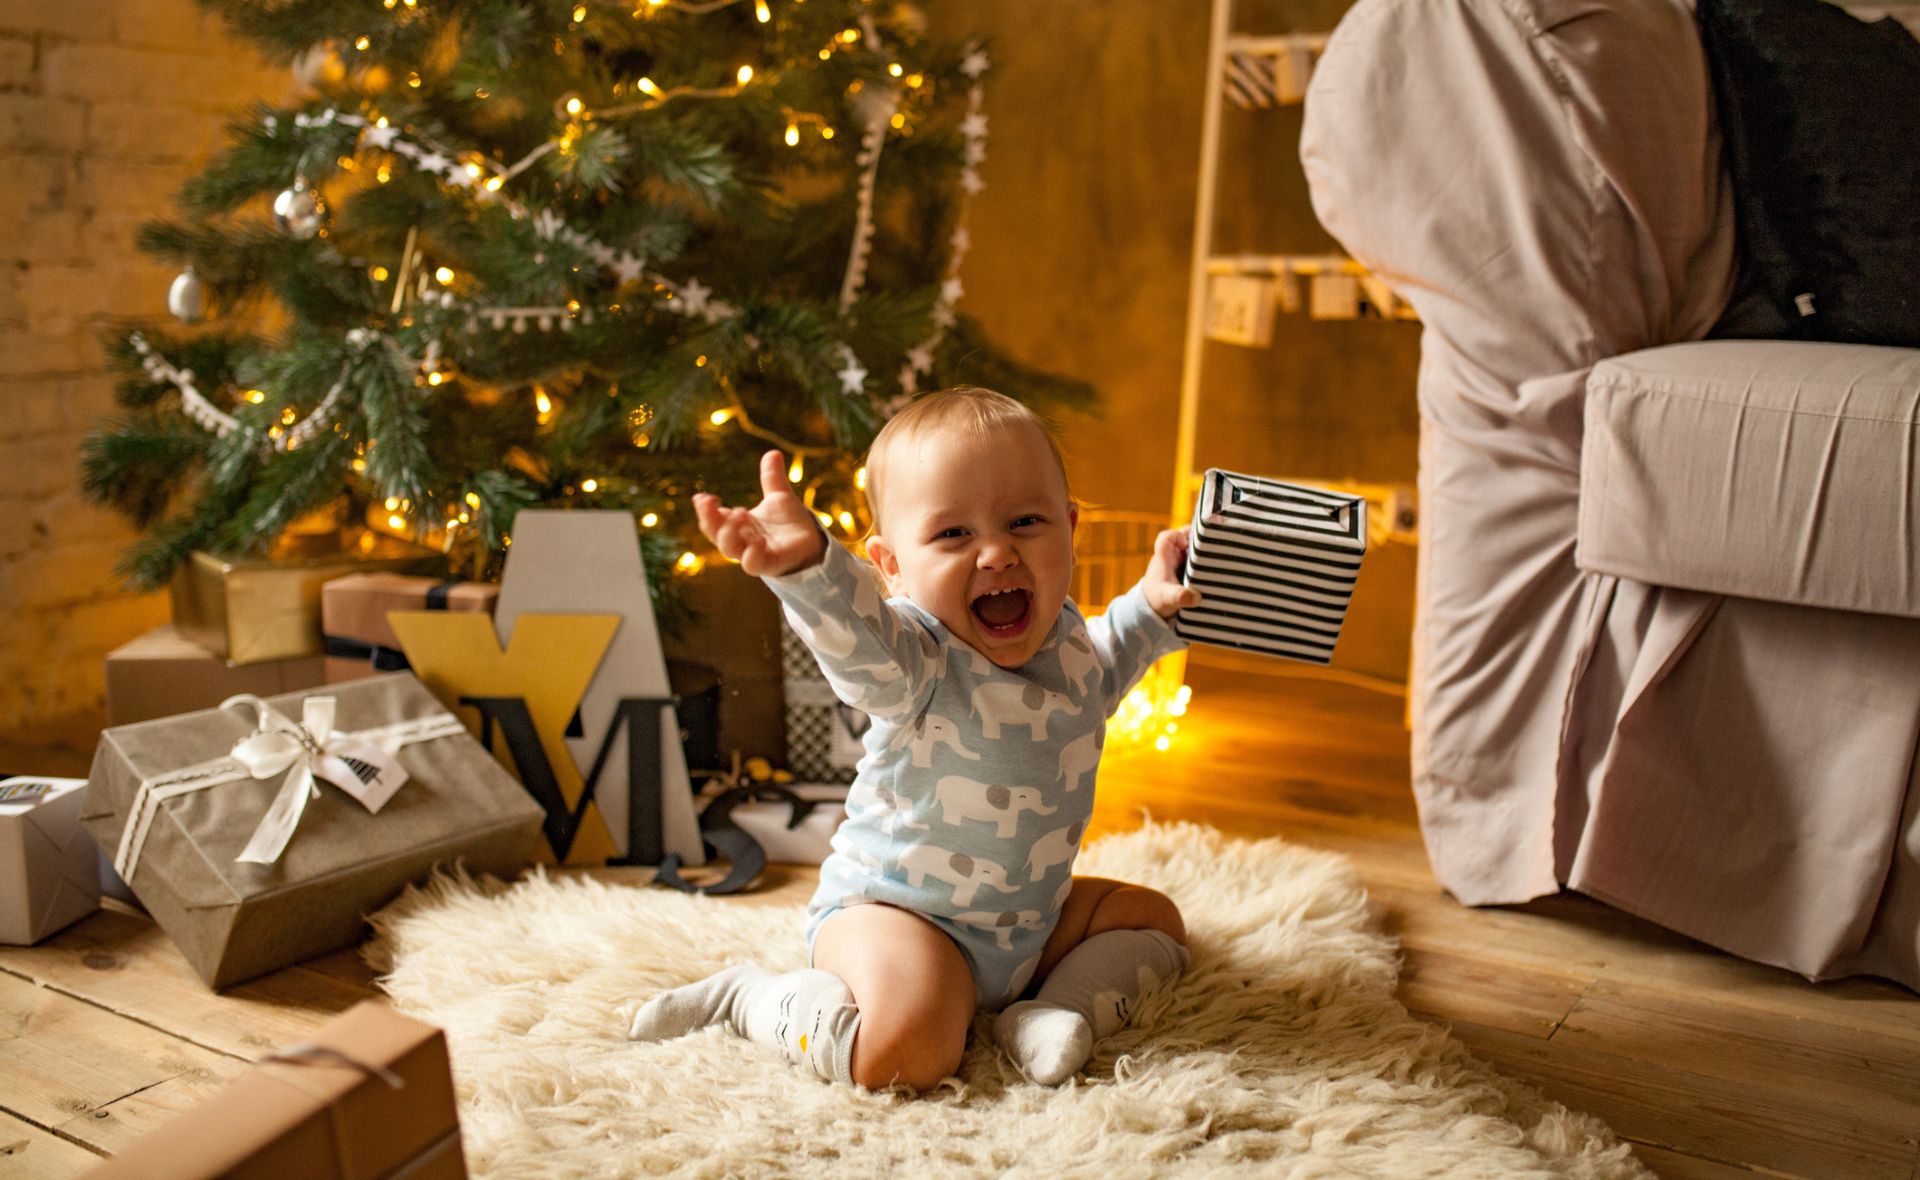 Spread the joy with this list of the best gifts for baby’s first Christmas